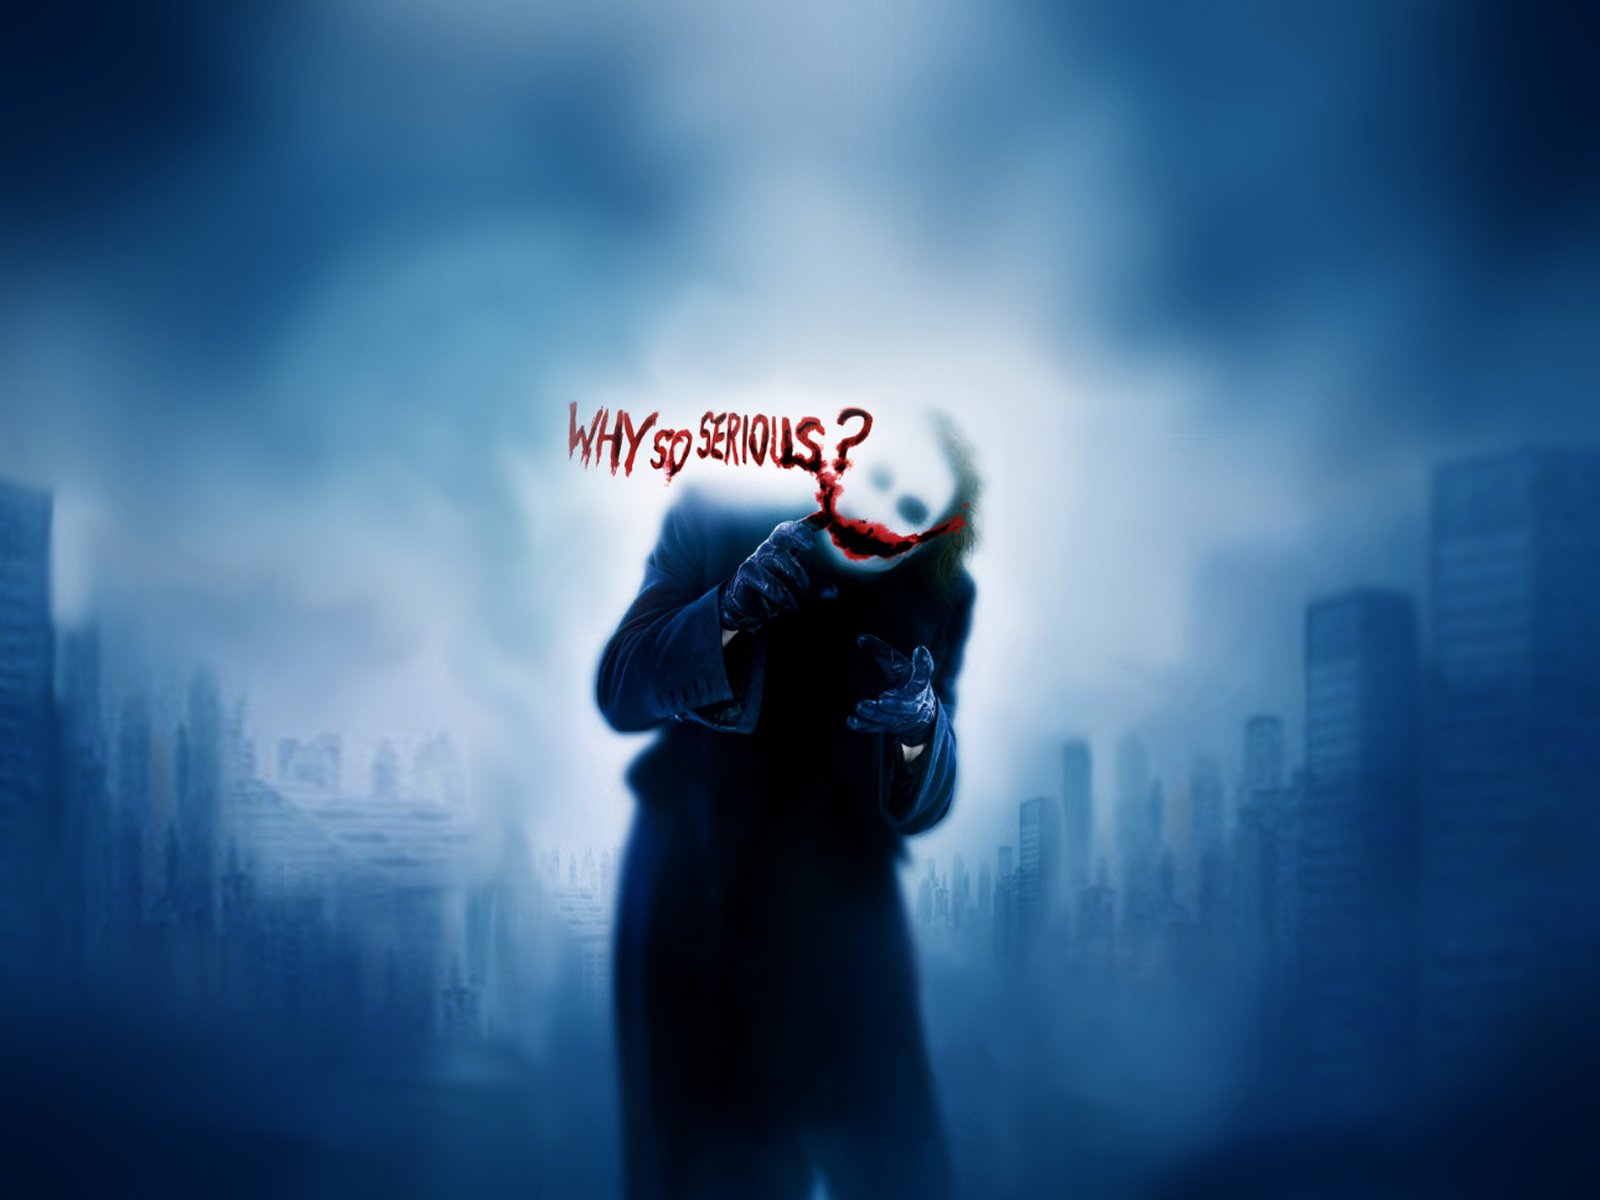 425 The Dark Knight HD Wallpapers | Backgrounds - Wallpaper Abyss